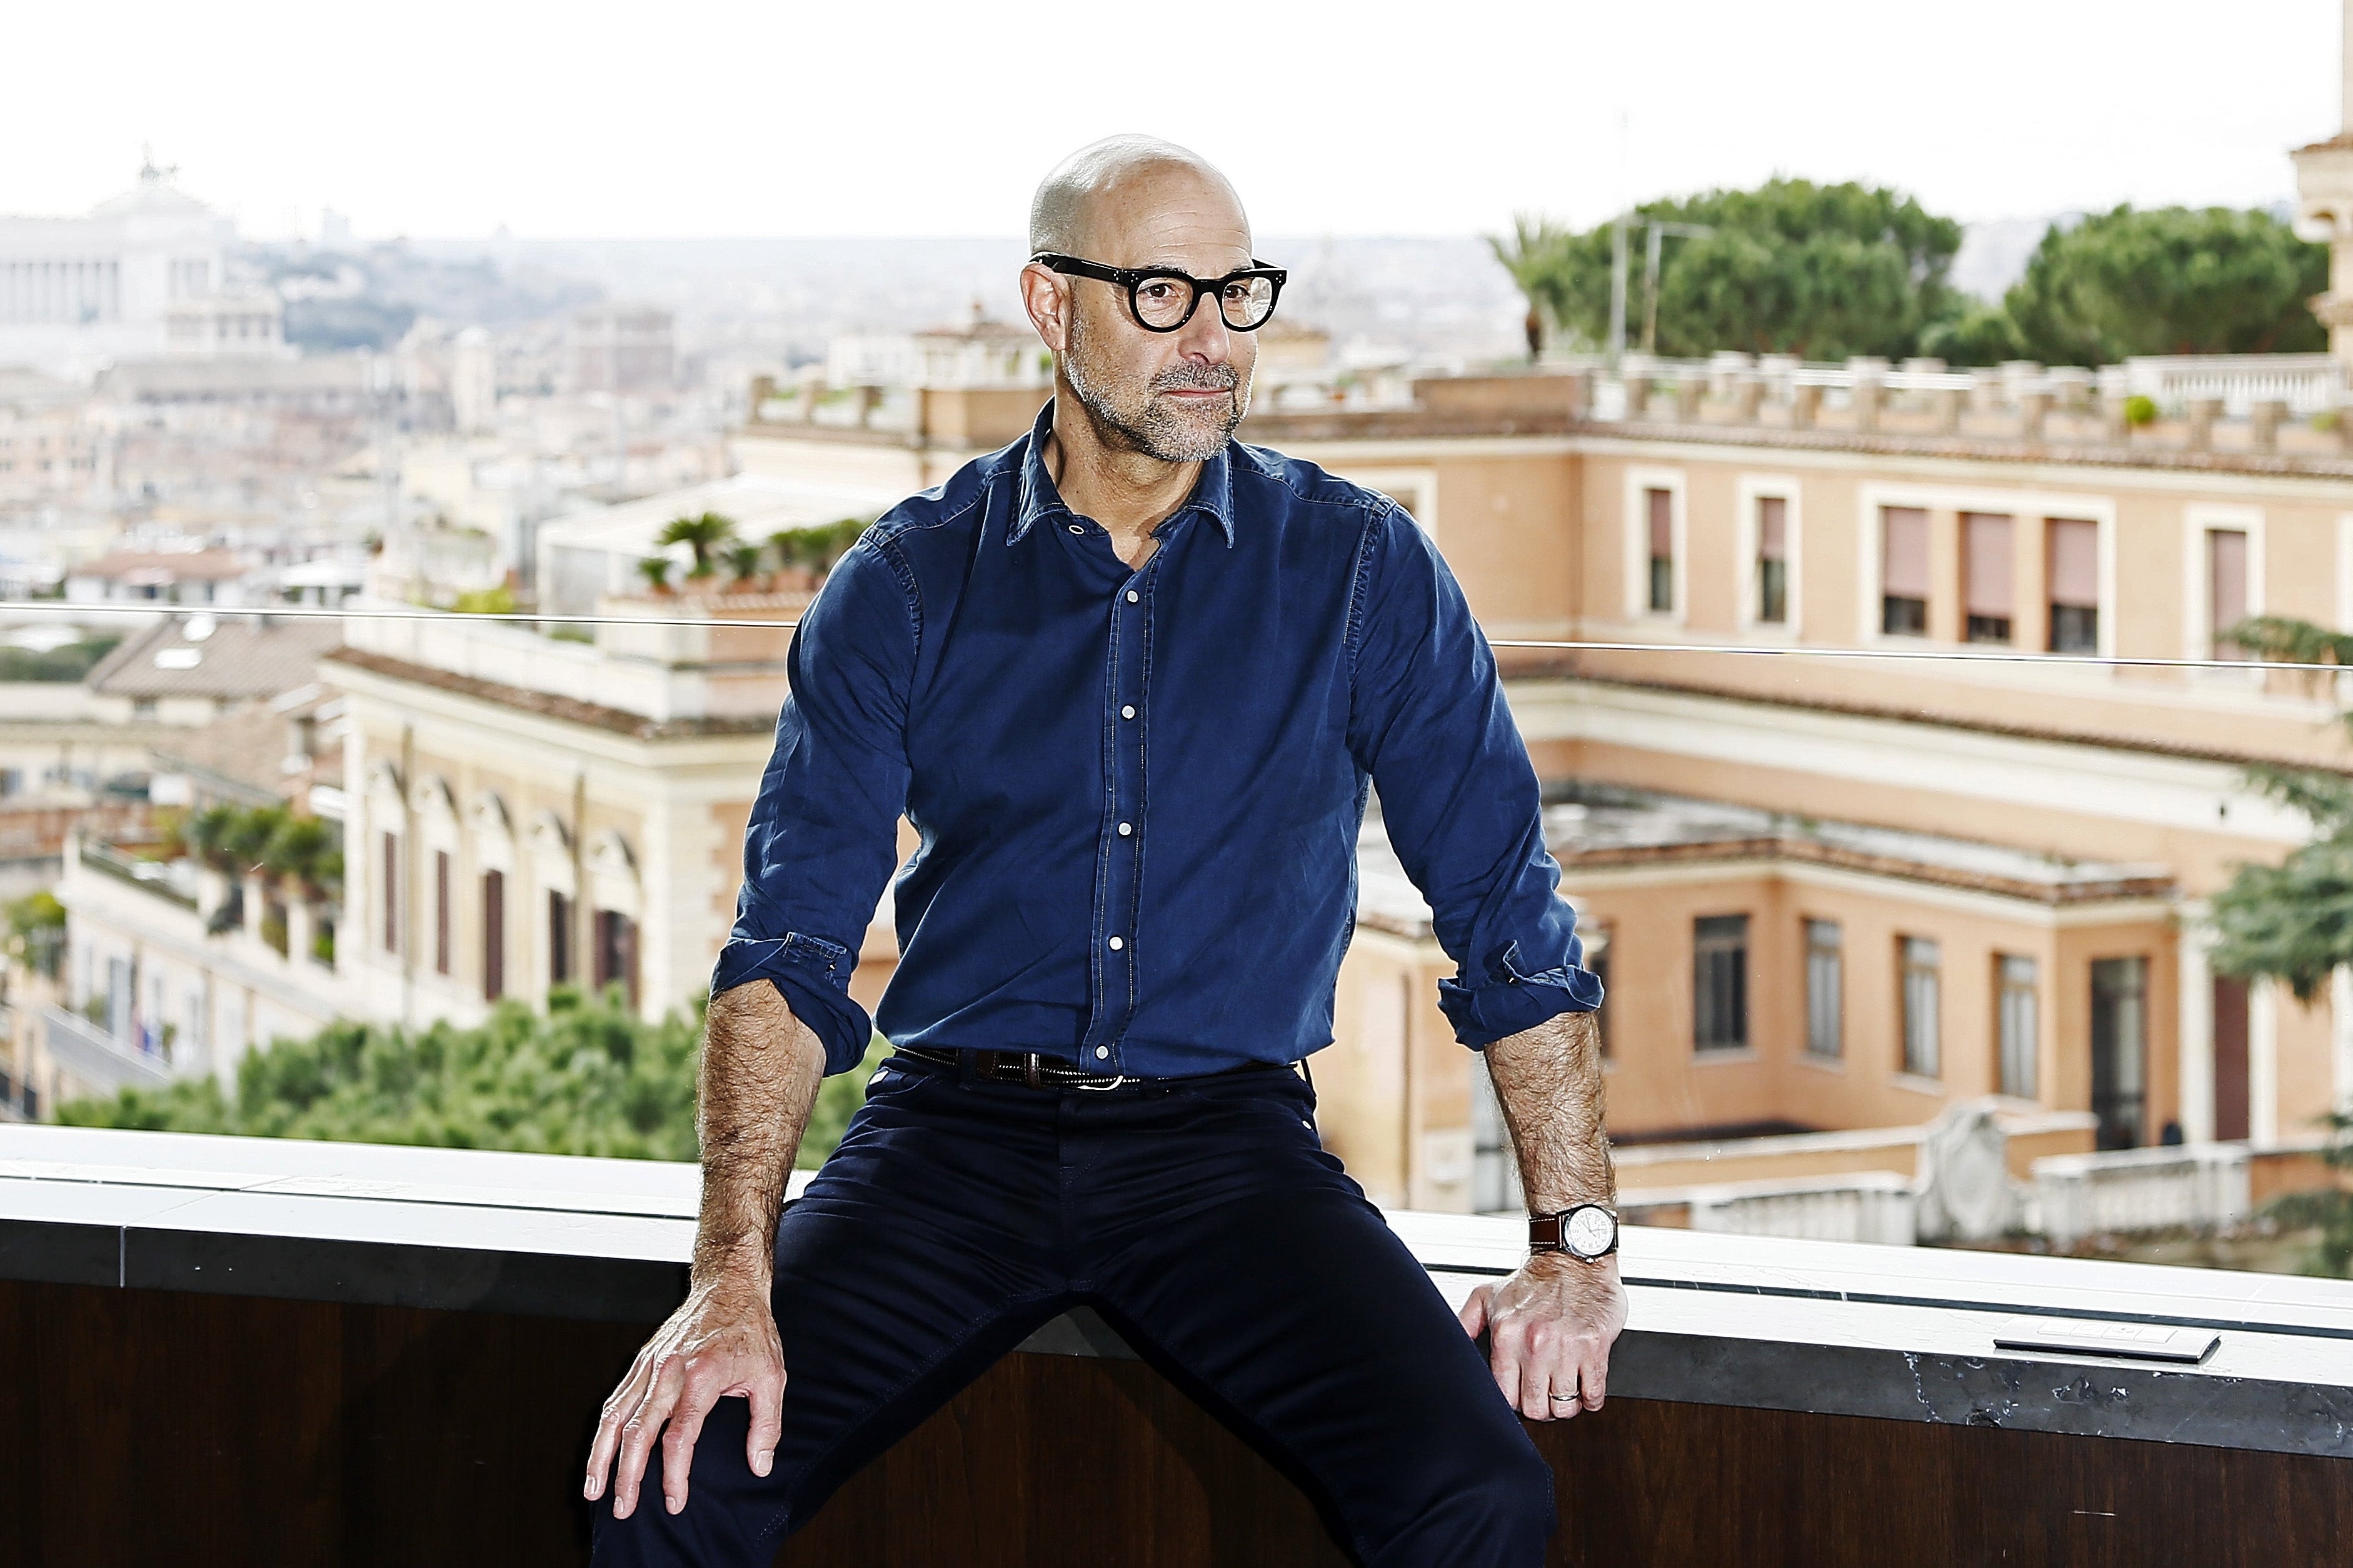 Stanley Tucci sitting on a ledge overlooking Italian buildings, his sleeves rolled up to reveal his famous forearms.